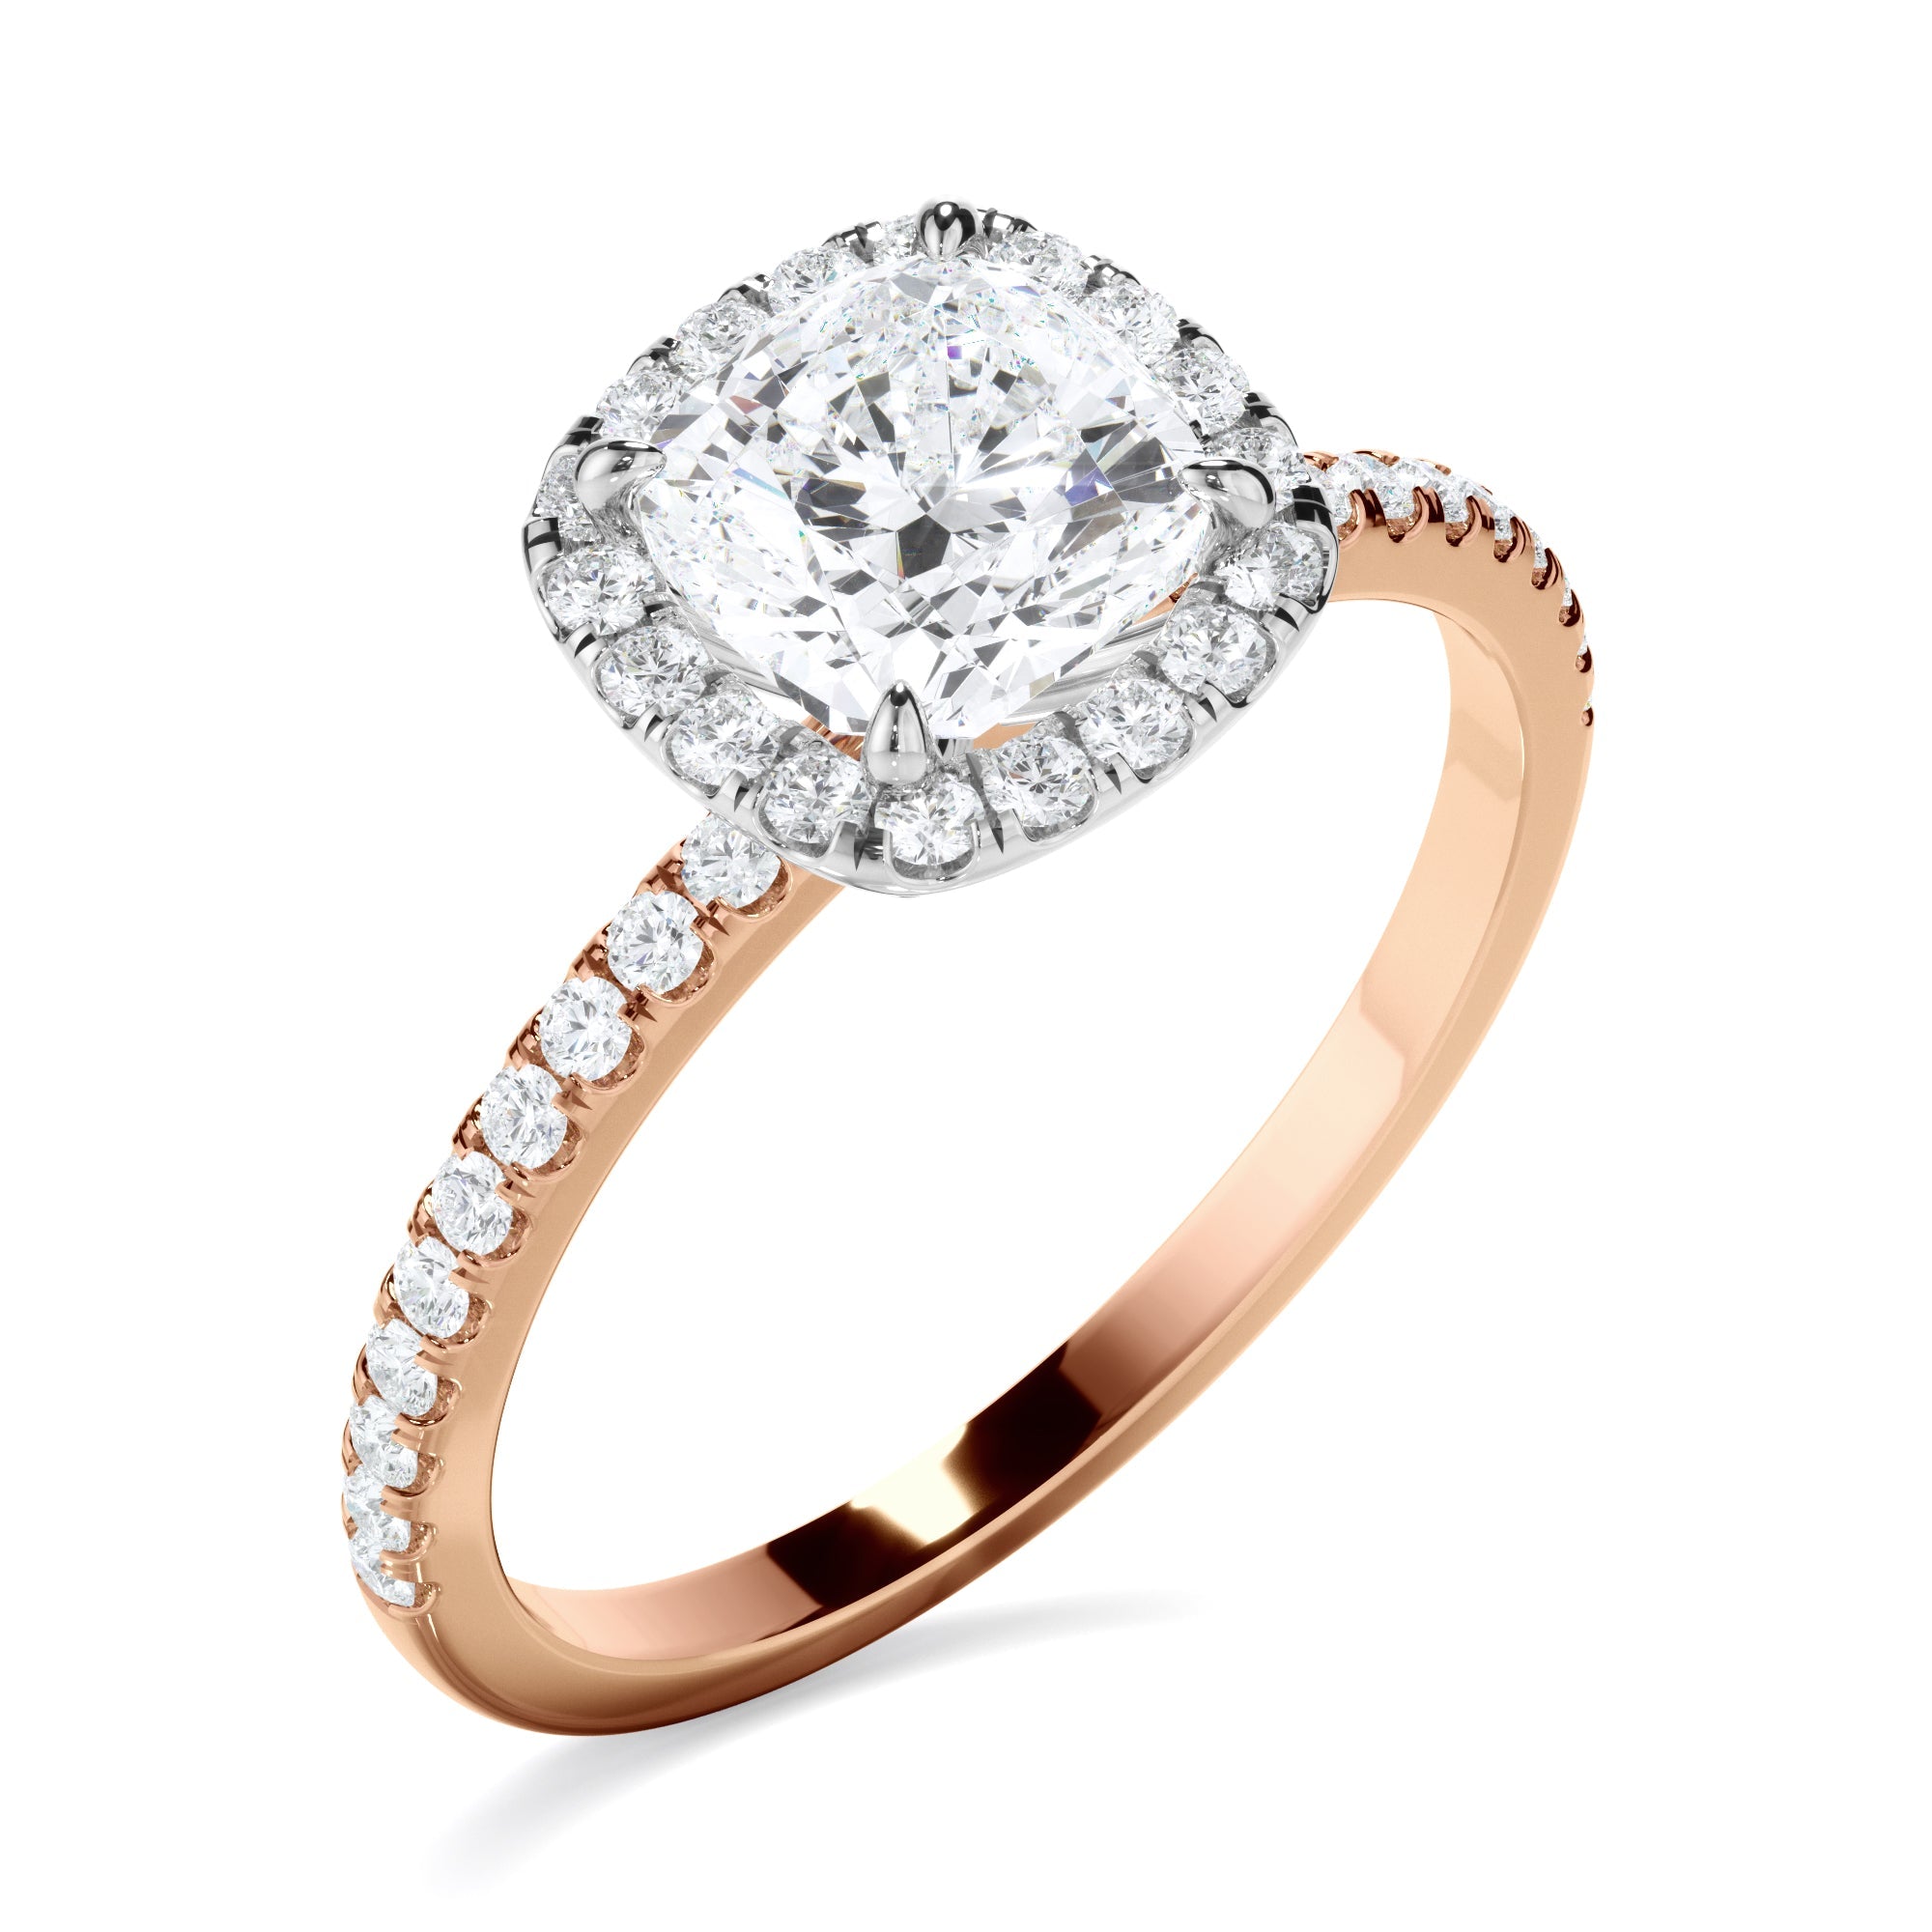 Cushion Cut Diamond Halo Engagement Ring With Pave Band